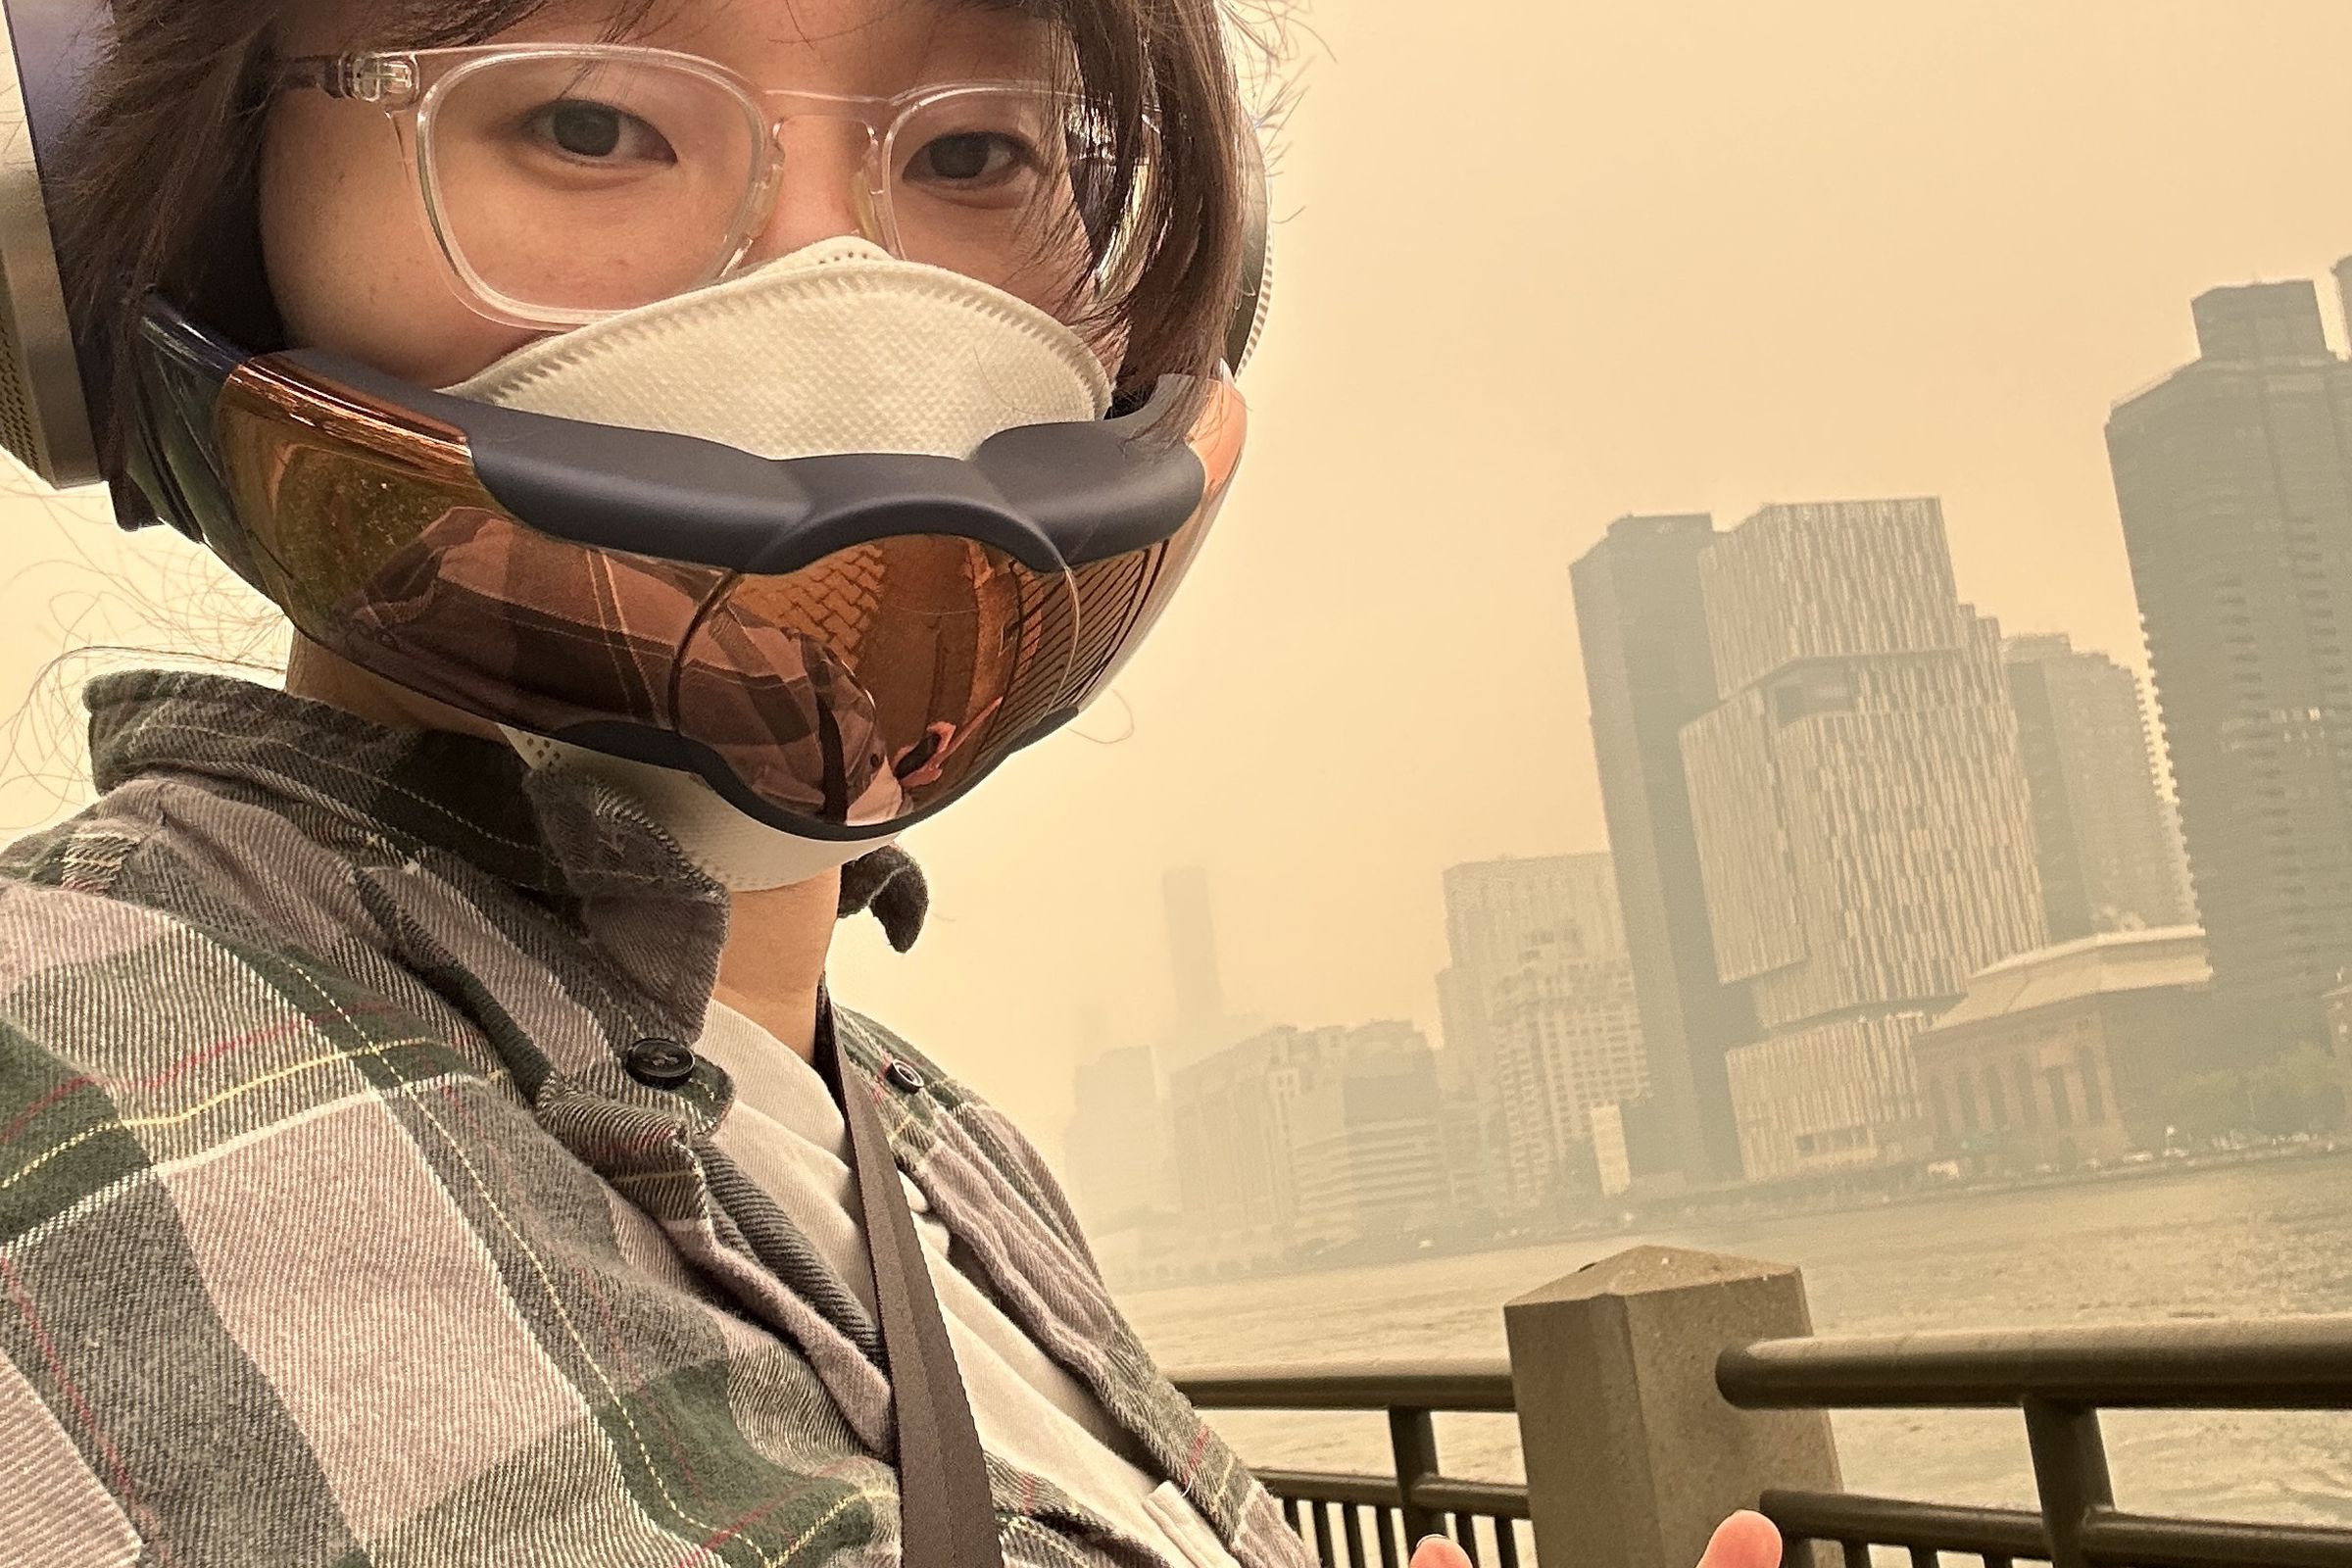 Woman wearing Dyson Zone during terrible wildfire smoke in New York City on June 7th